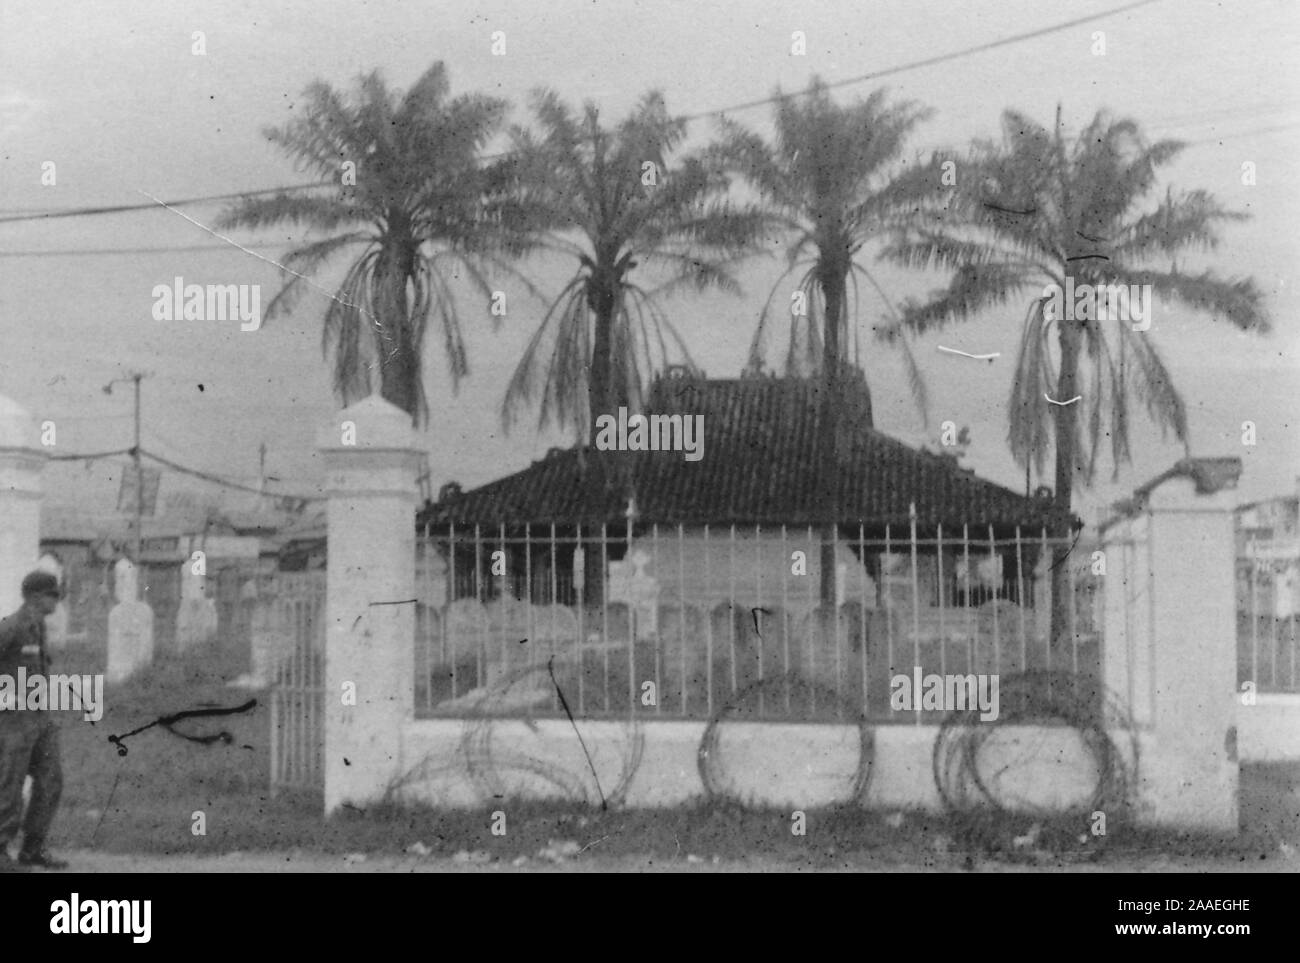 A uniformed serviceman walks past the open gate of a Buddhist temple with a tiled, hip and gable roof, stele and four palm trees in the front yard, and barbed wire leaning on the outer wall, Saigon, Vietnam, 1966. () Stock Photo